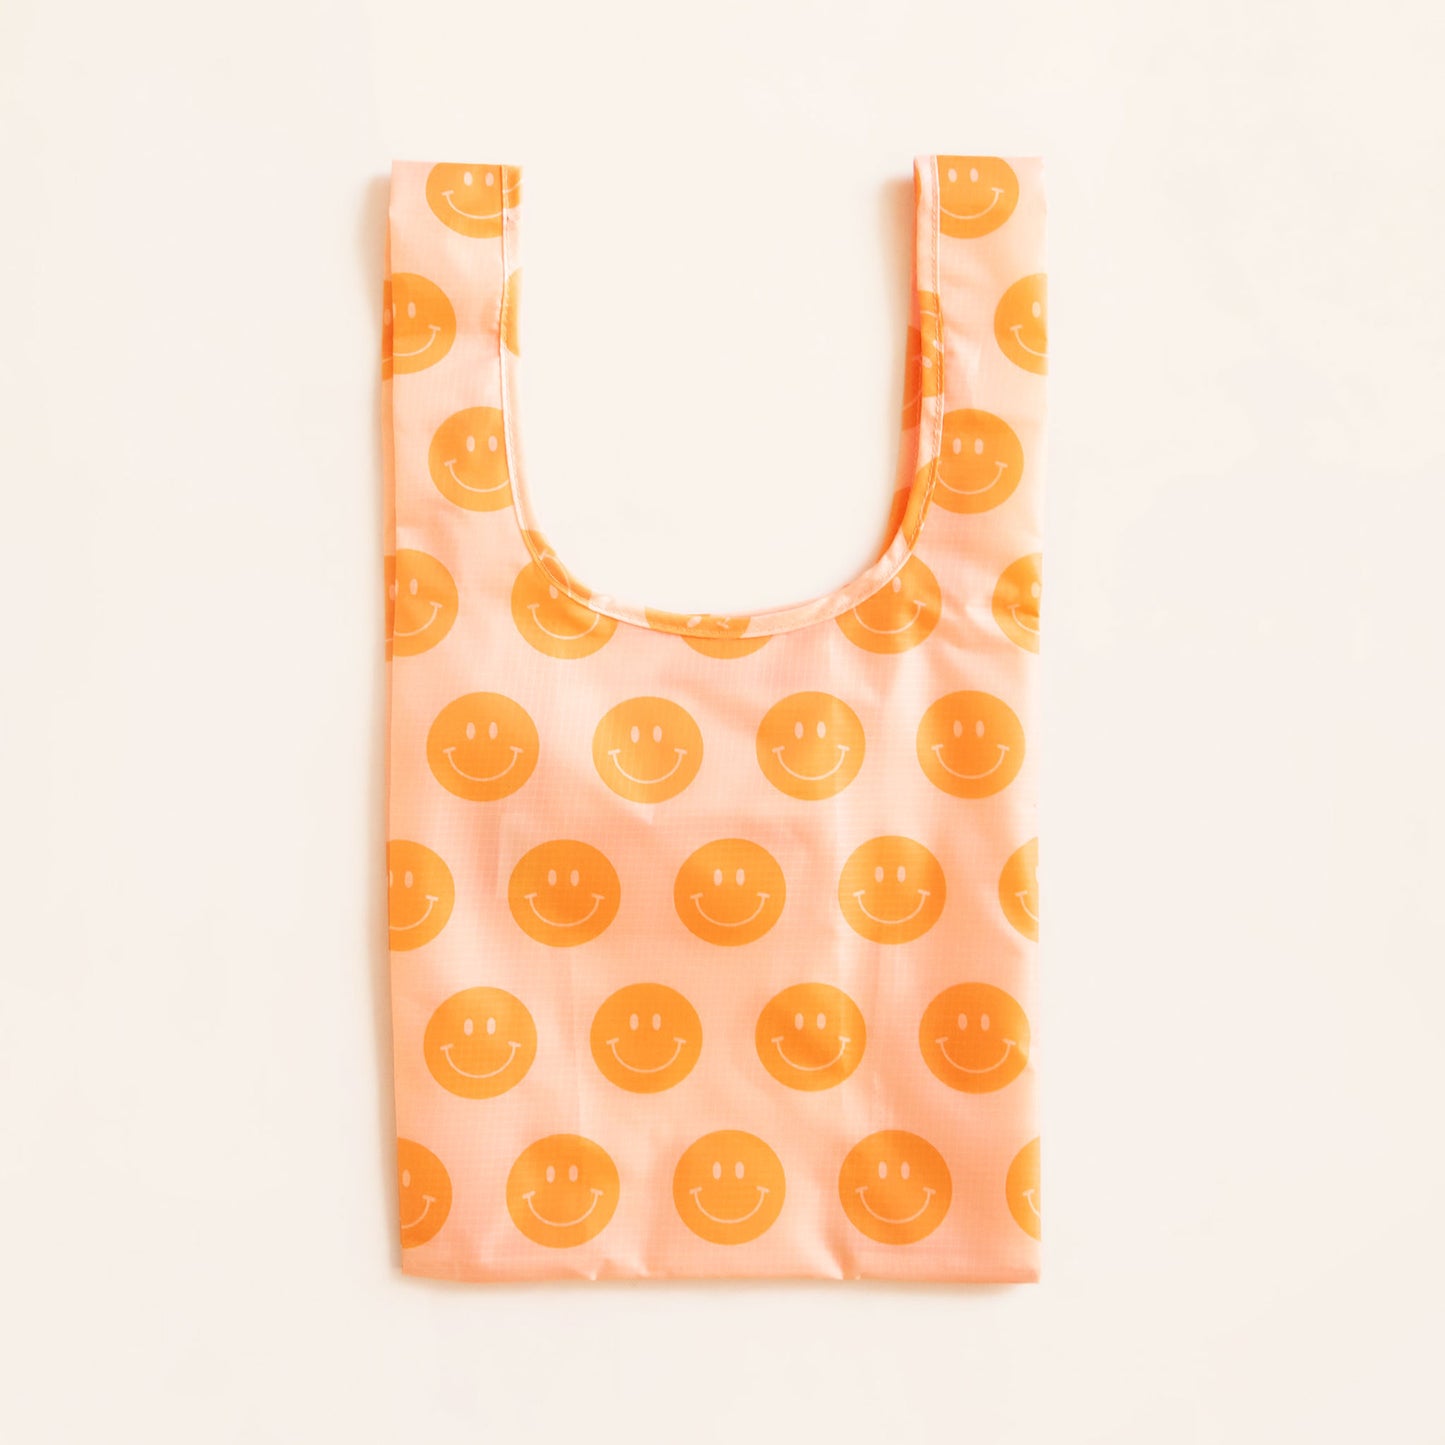 Peach reusable covered in a print of orange smiley facies. The bag is positioned flat on a table and has a 'U' shape between two handles.